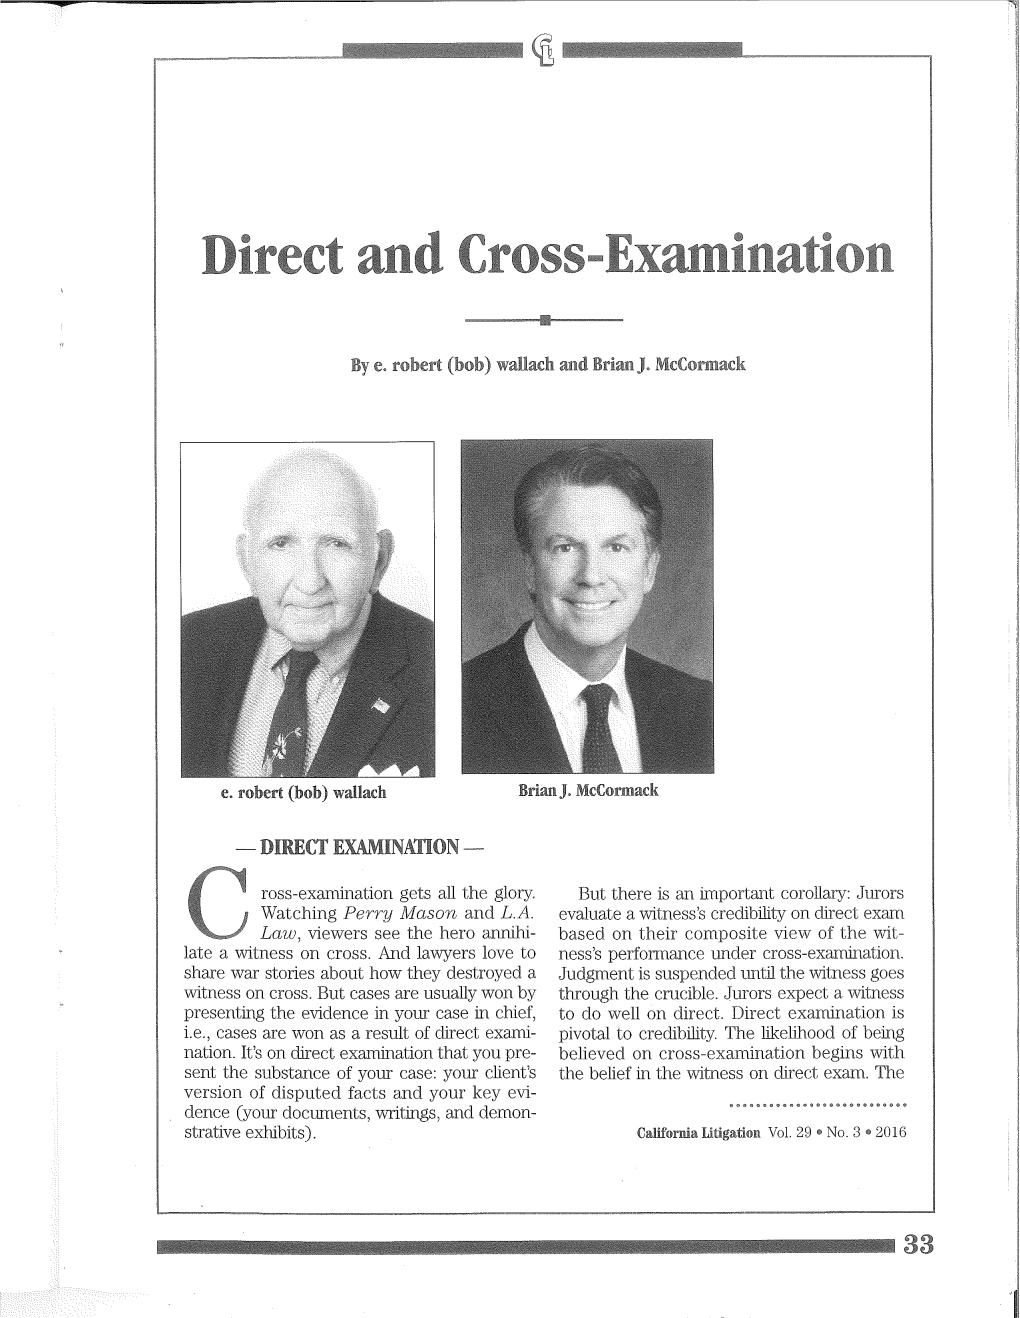 Direct and Cross-Examination